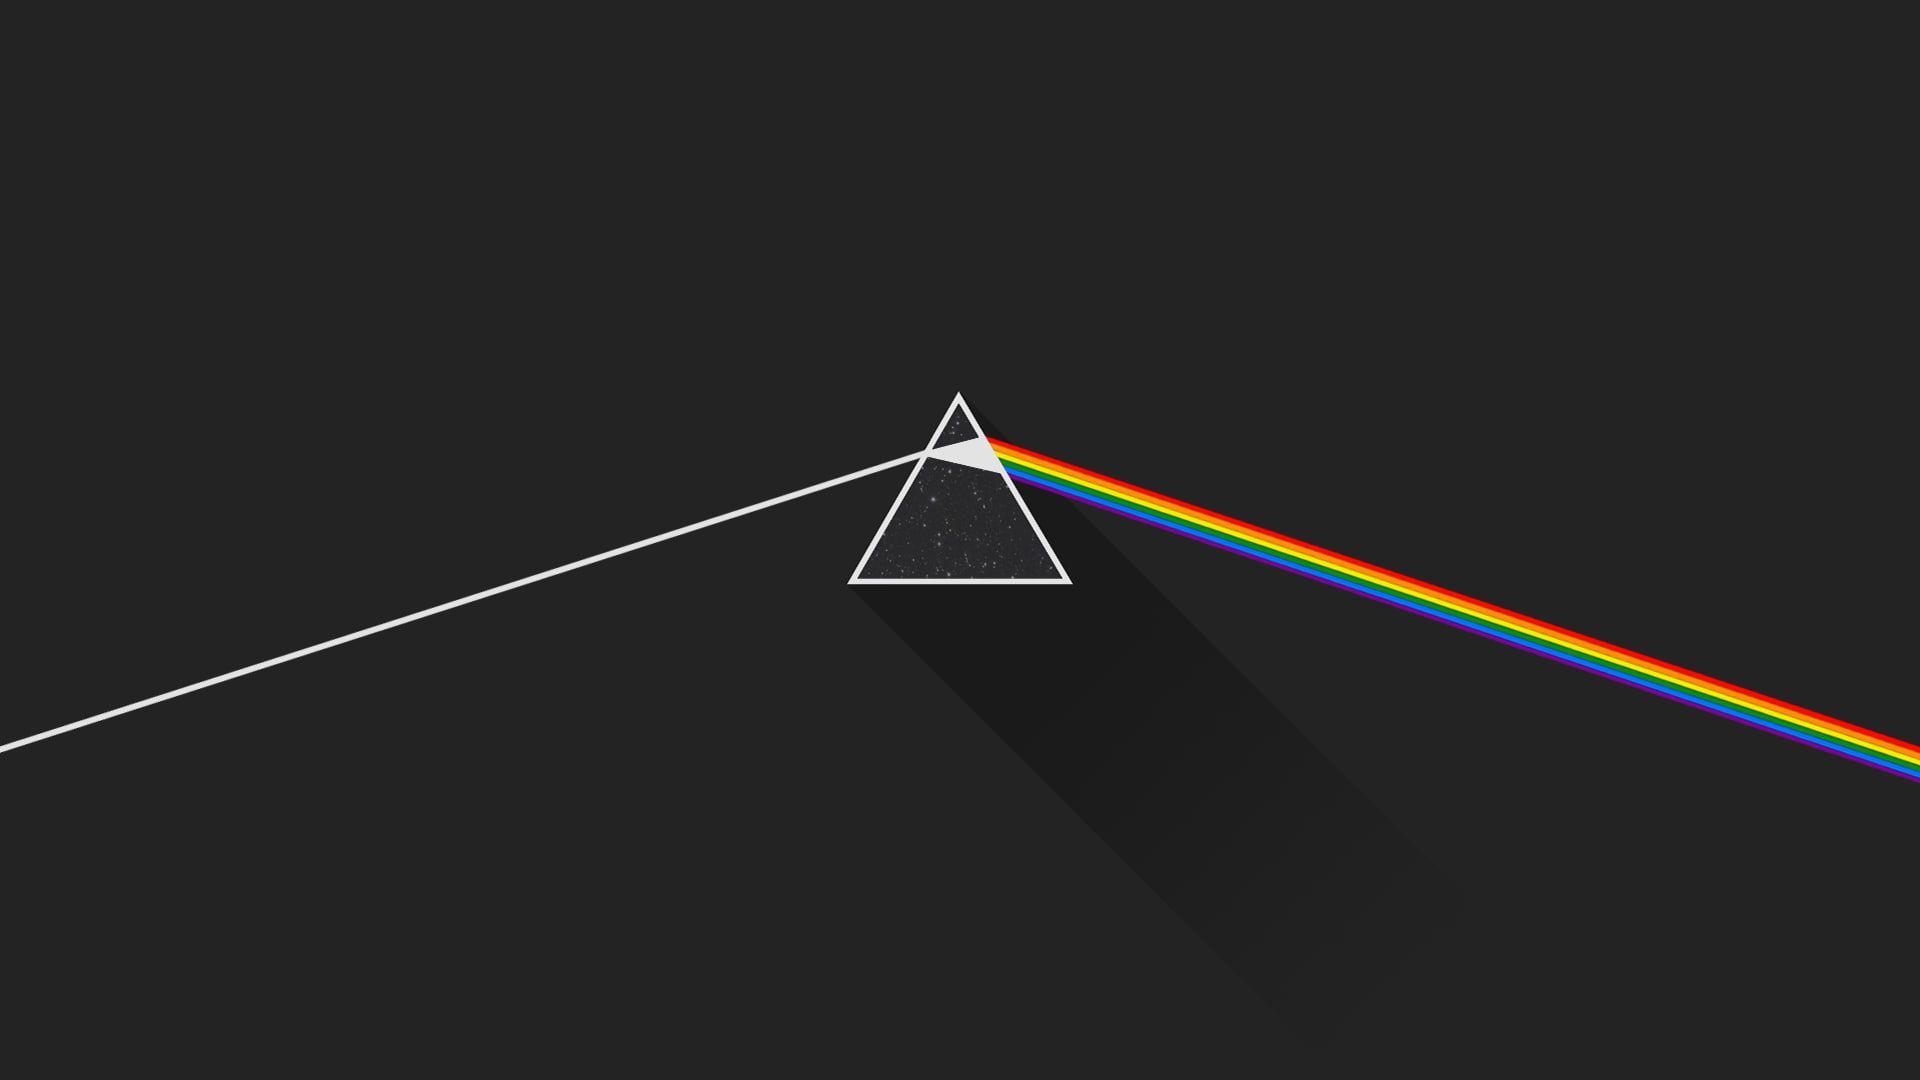 Wallpaper Pink Floyd, The Dark Side of The Moon, triangle shape, multi colored. Pink floyd wallpaper, Pink floyd background, Dark wallpaper